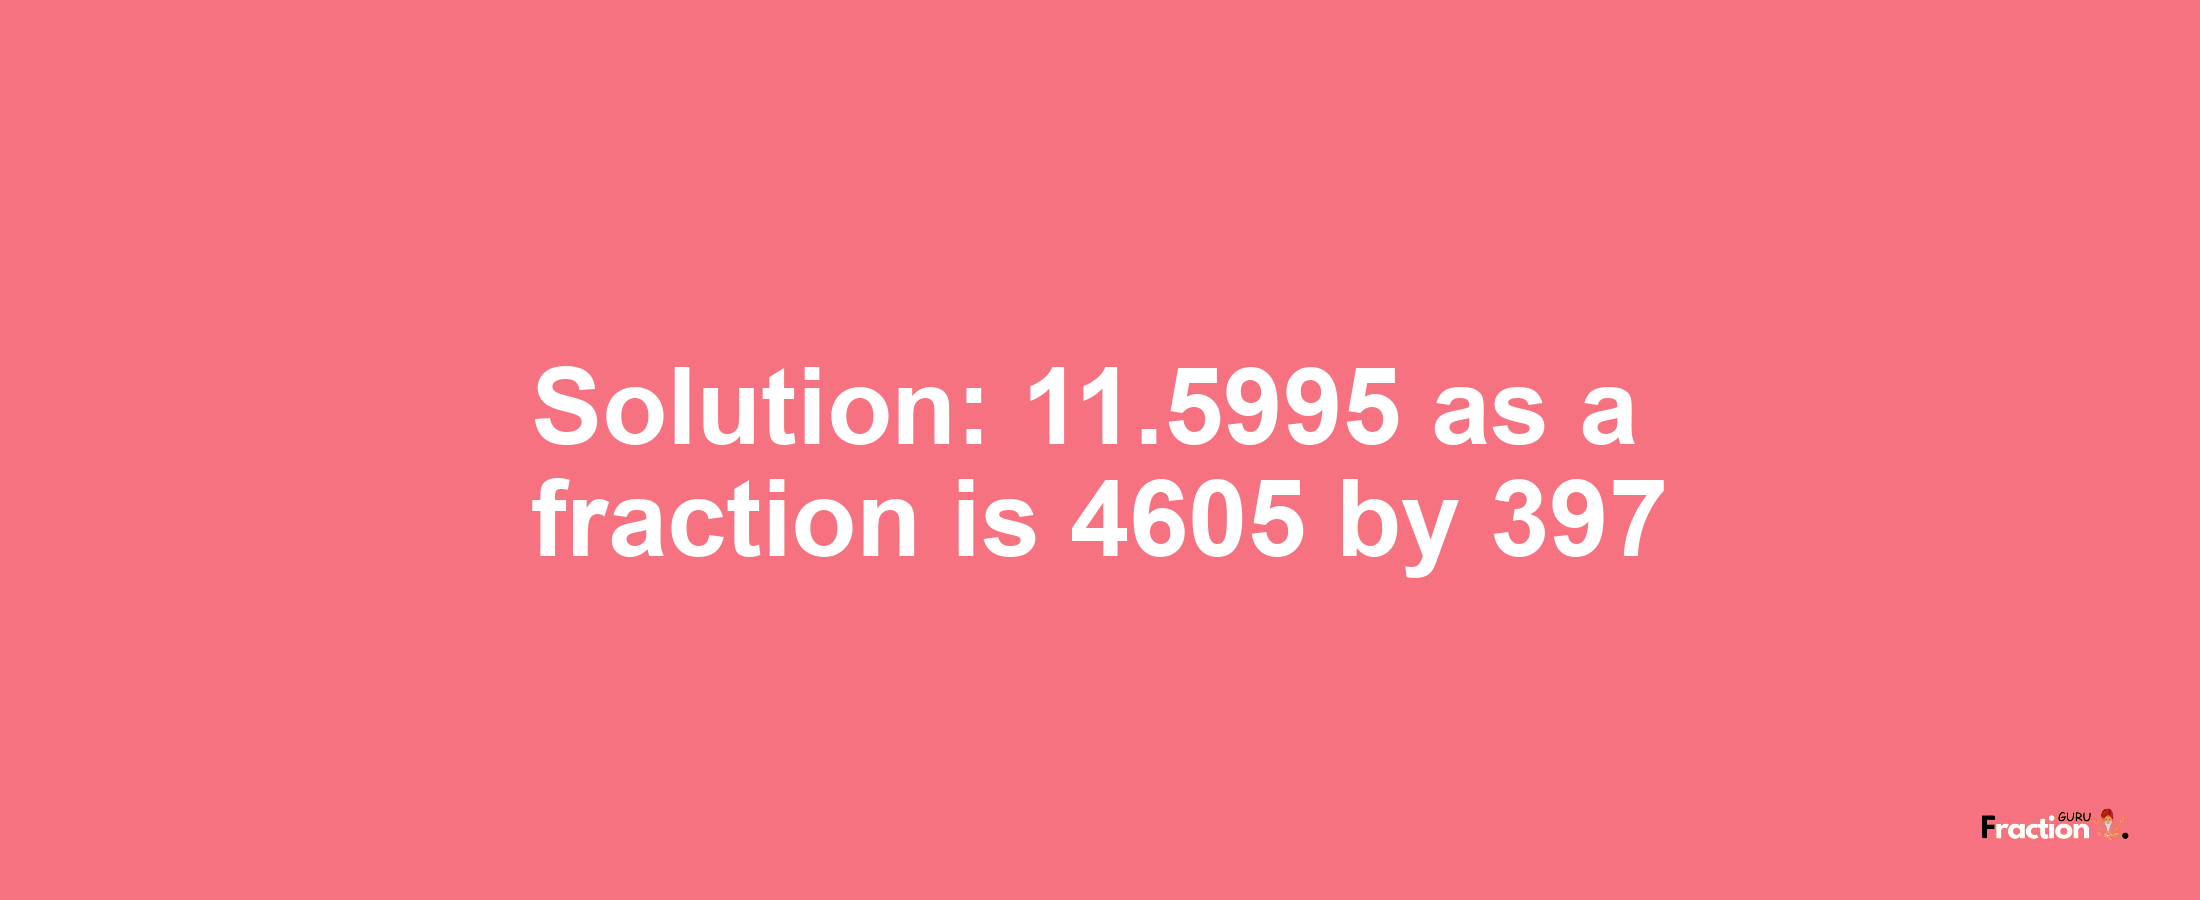 Solution:11.5995 as a fraction is 4605/397